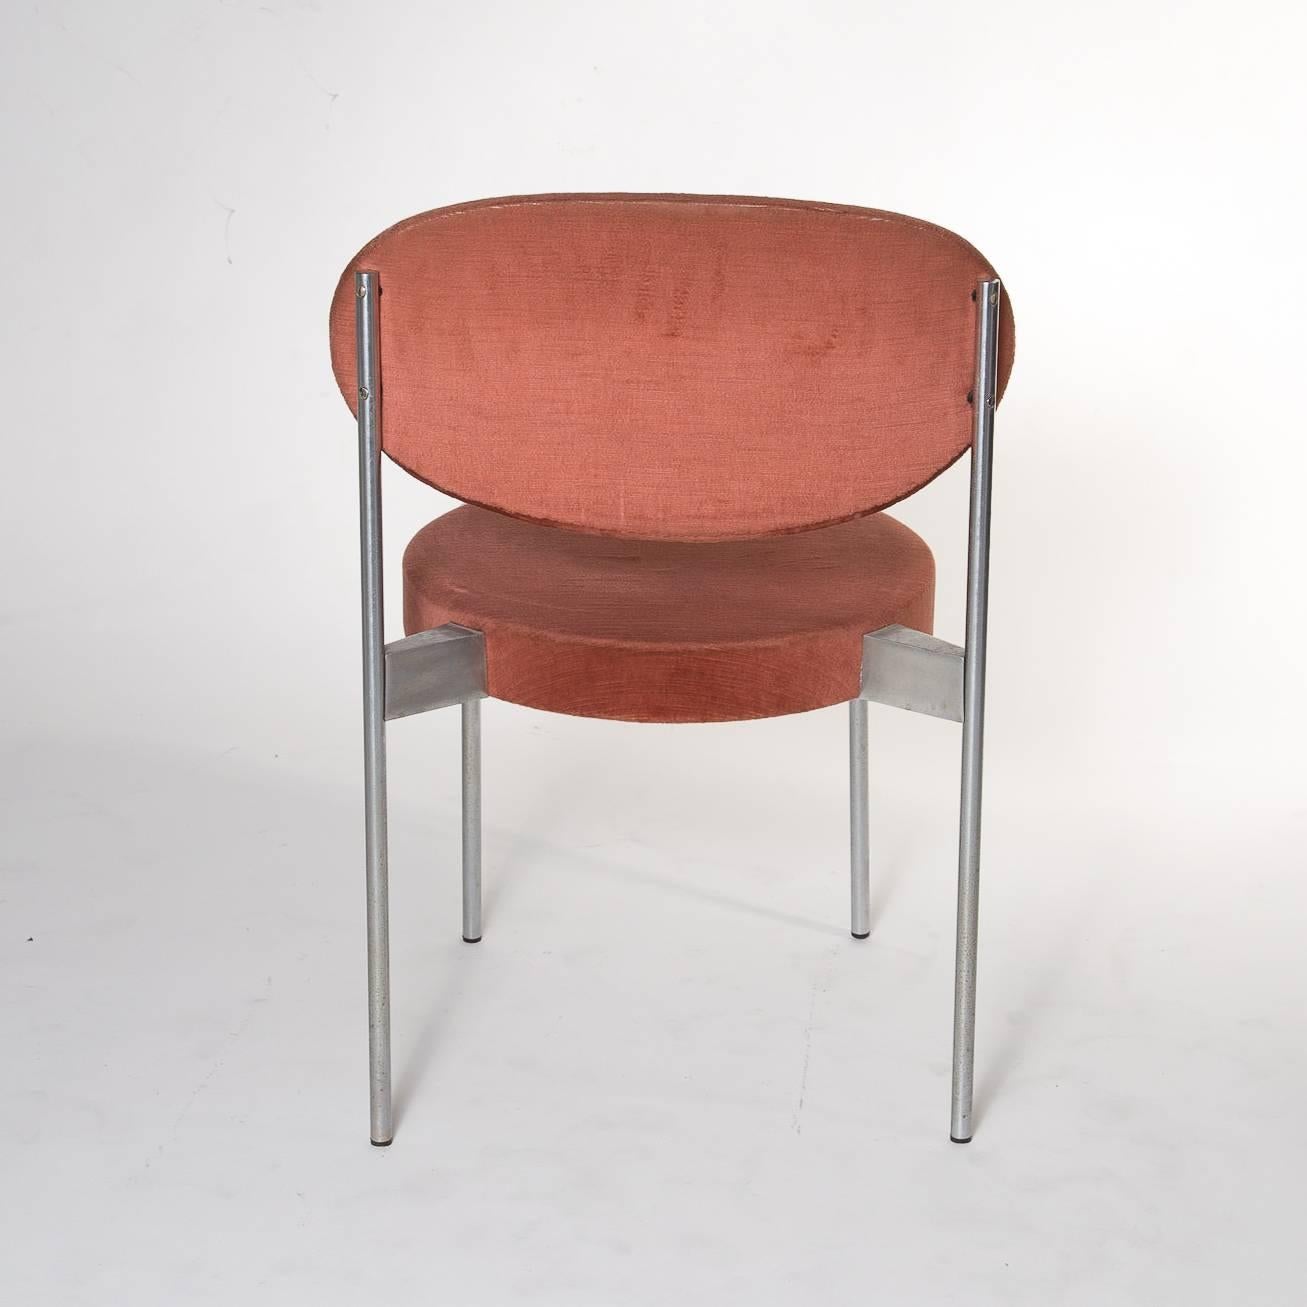 Mid-Century Modern Set of 12 Verner Panton Mid-century Dining Chairs 430 for Thonet Designed, 1967